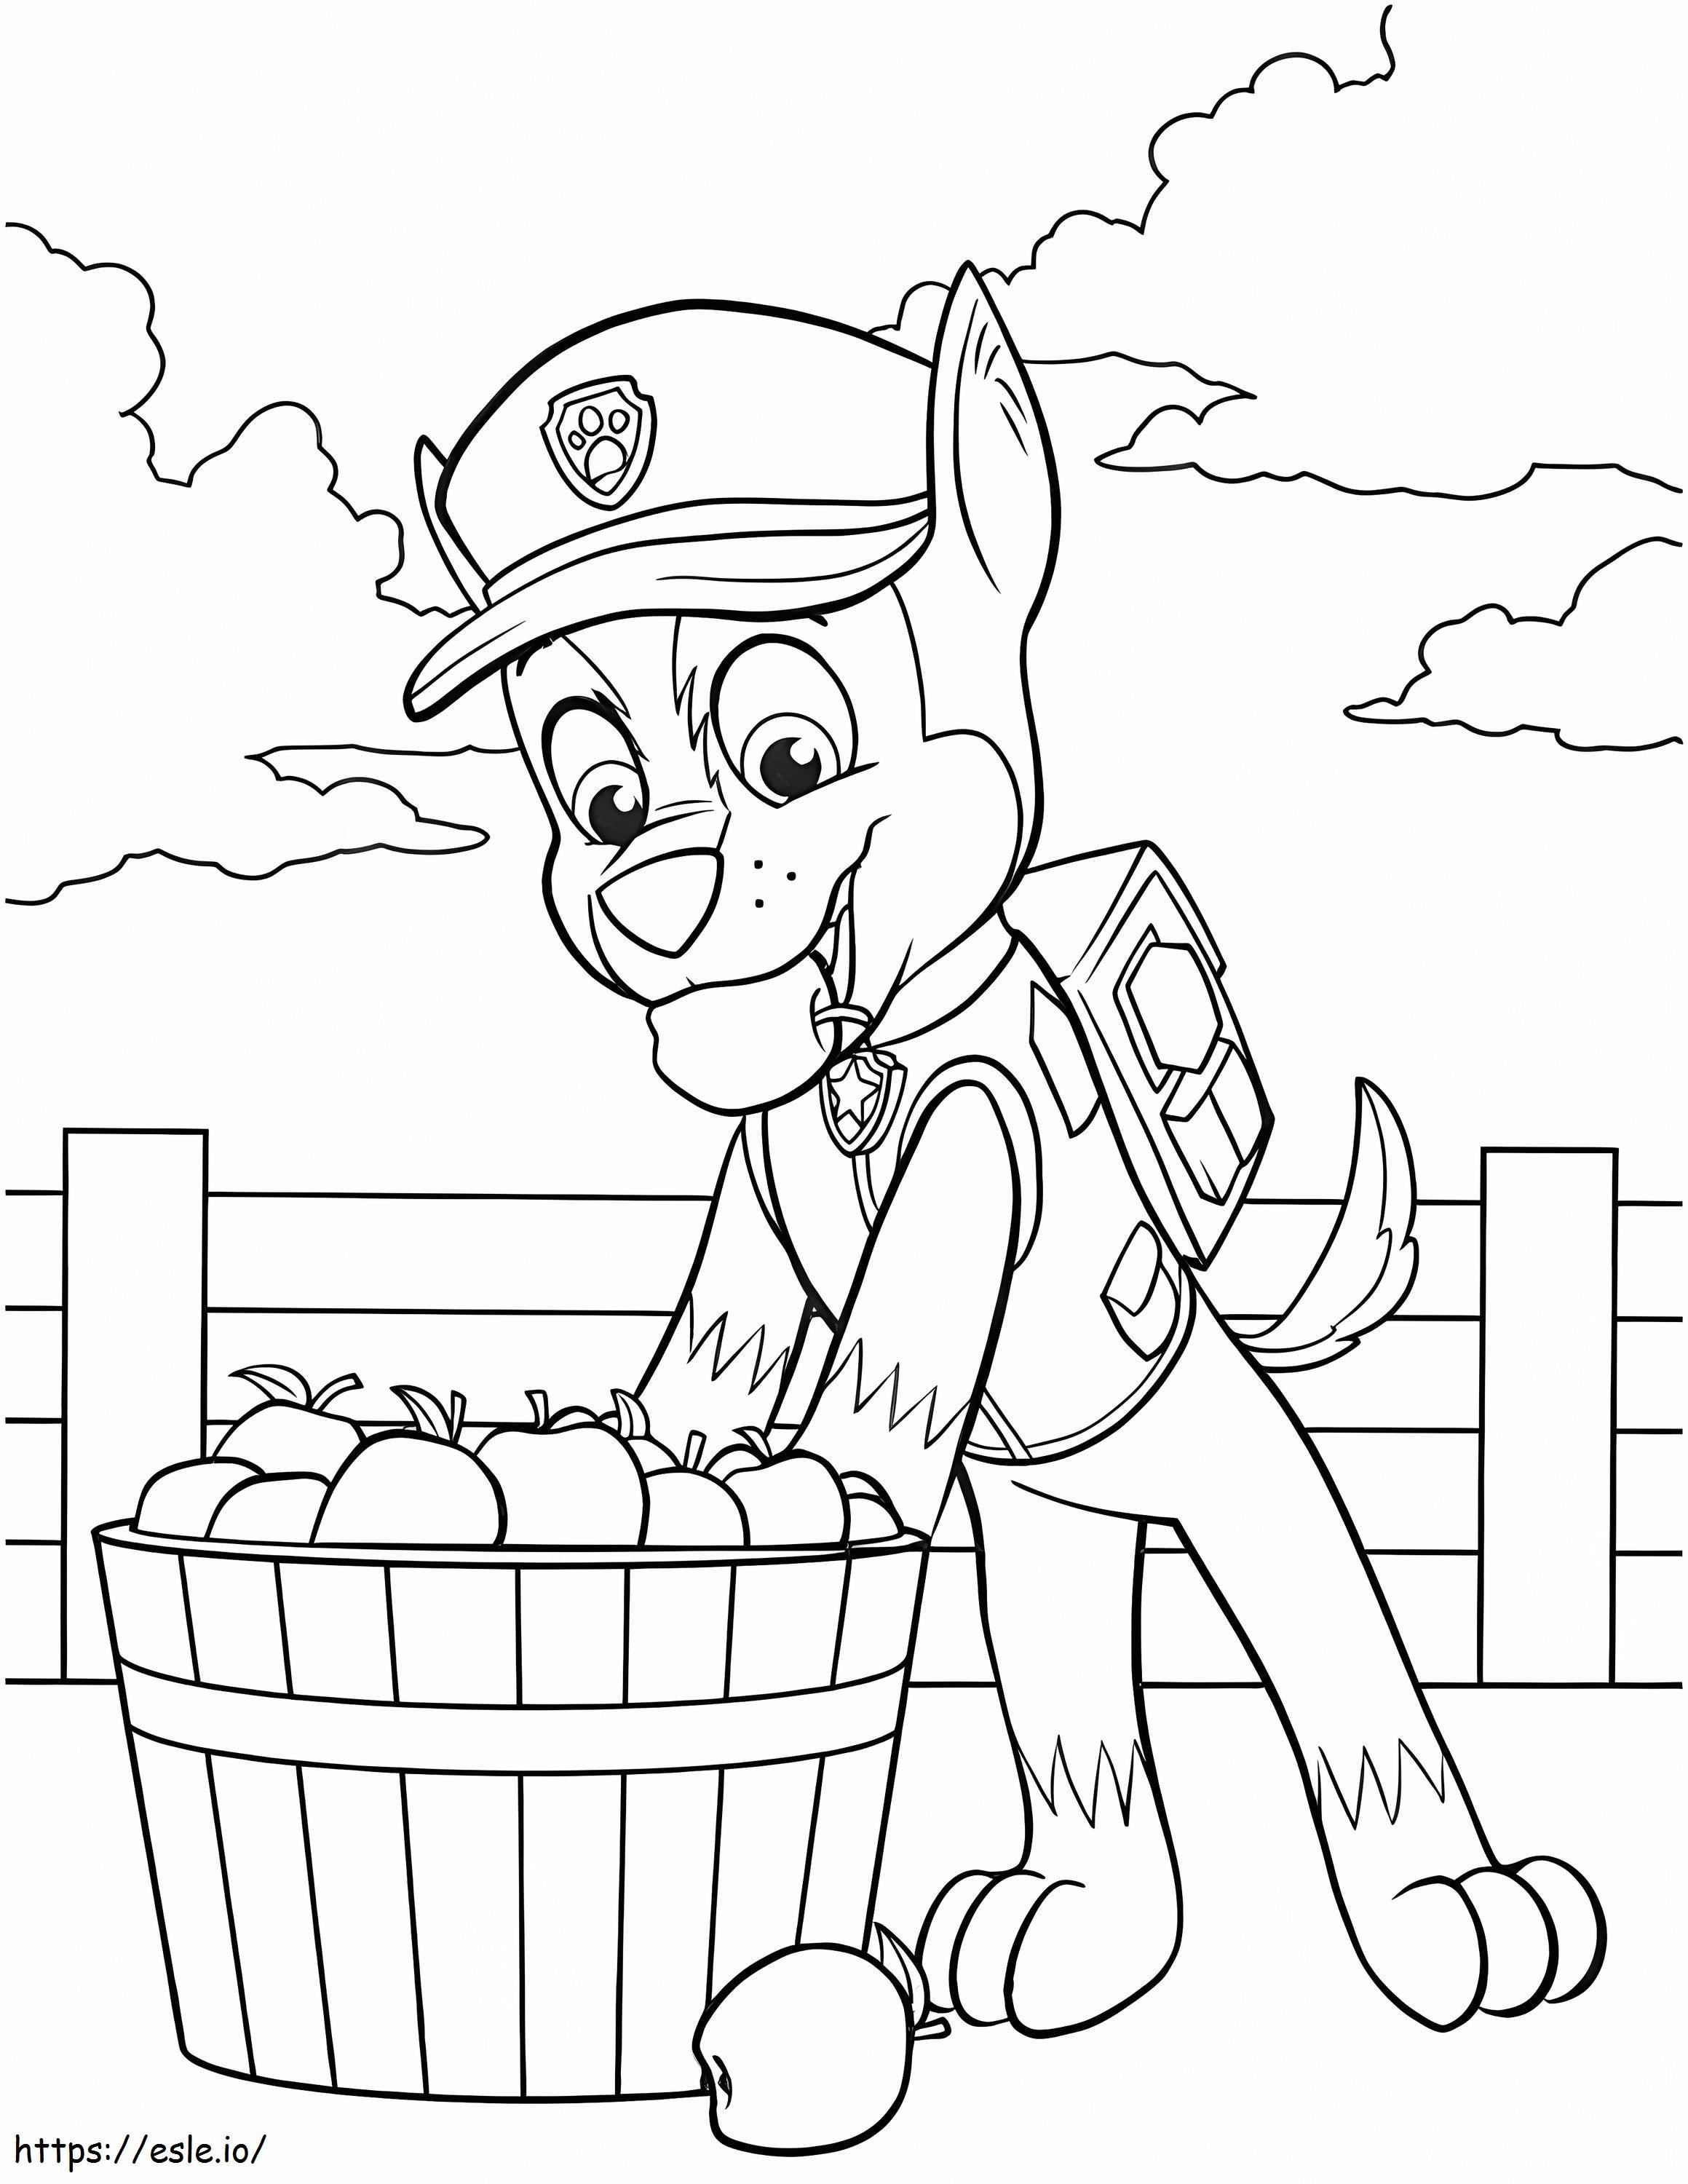 Chase Harvesting Apple coloring page